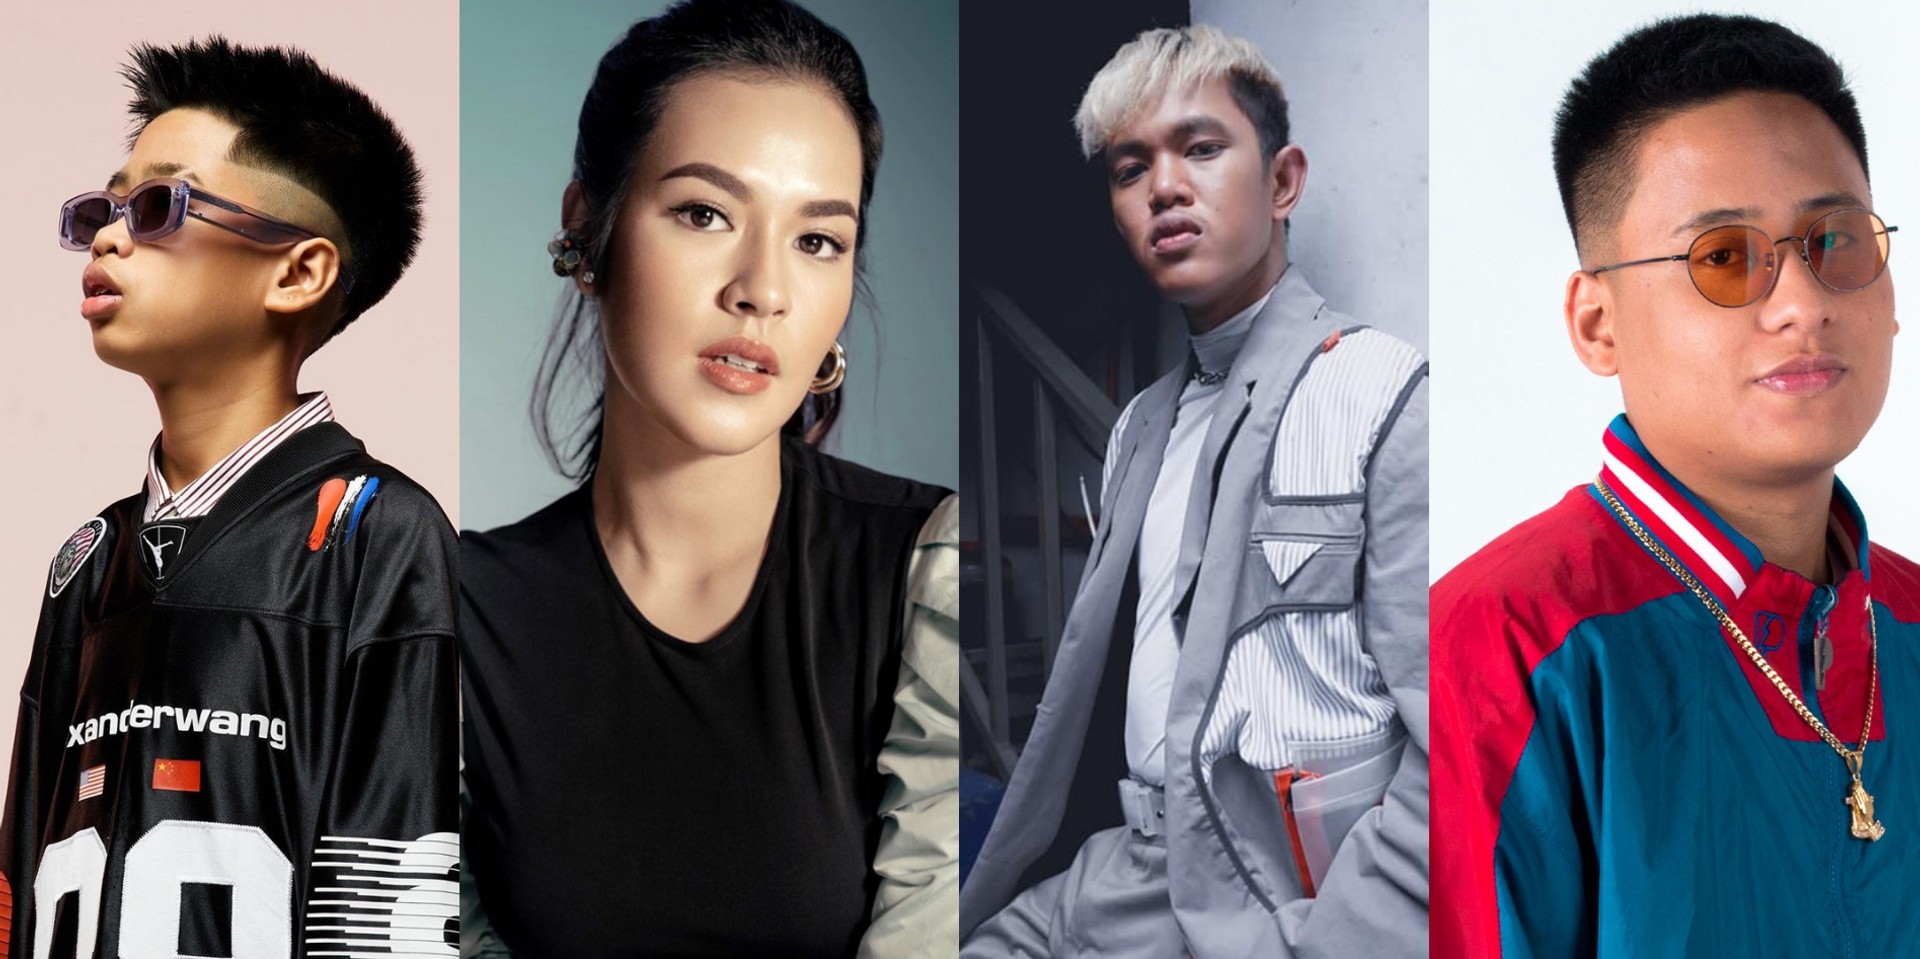 Raisa, Yonnyboii, Matthaios, and SPRITE team up for Raya and The Last Dragon-inspired song 'Trust Again'